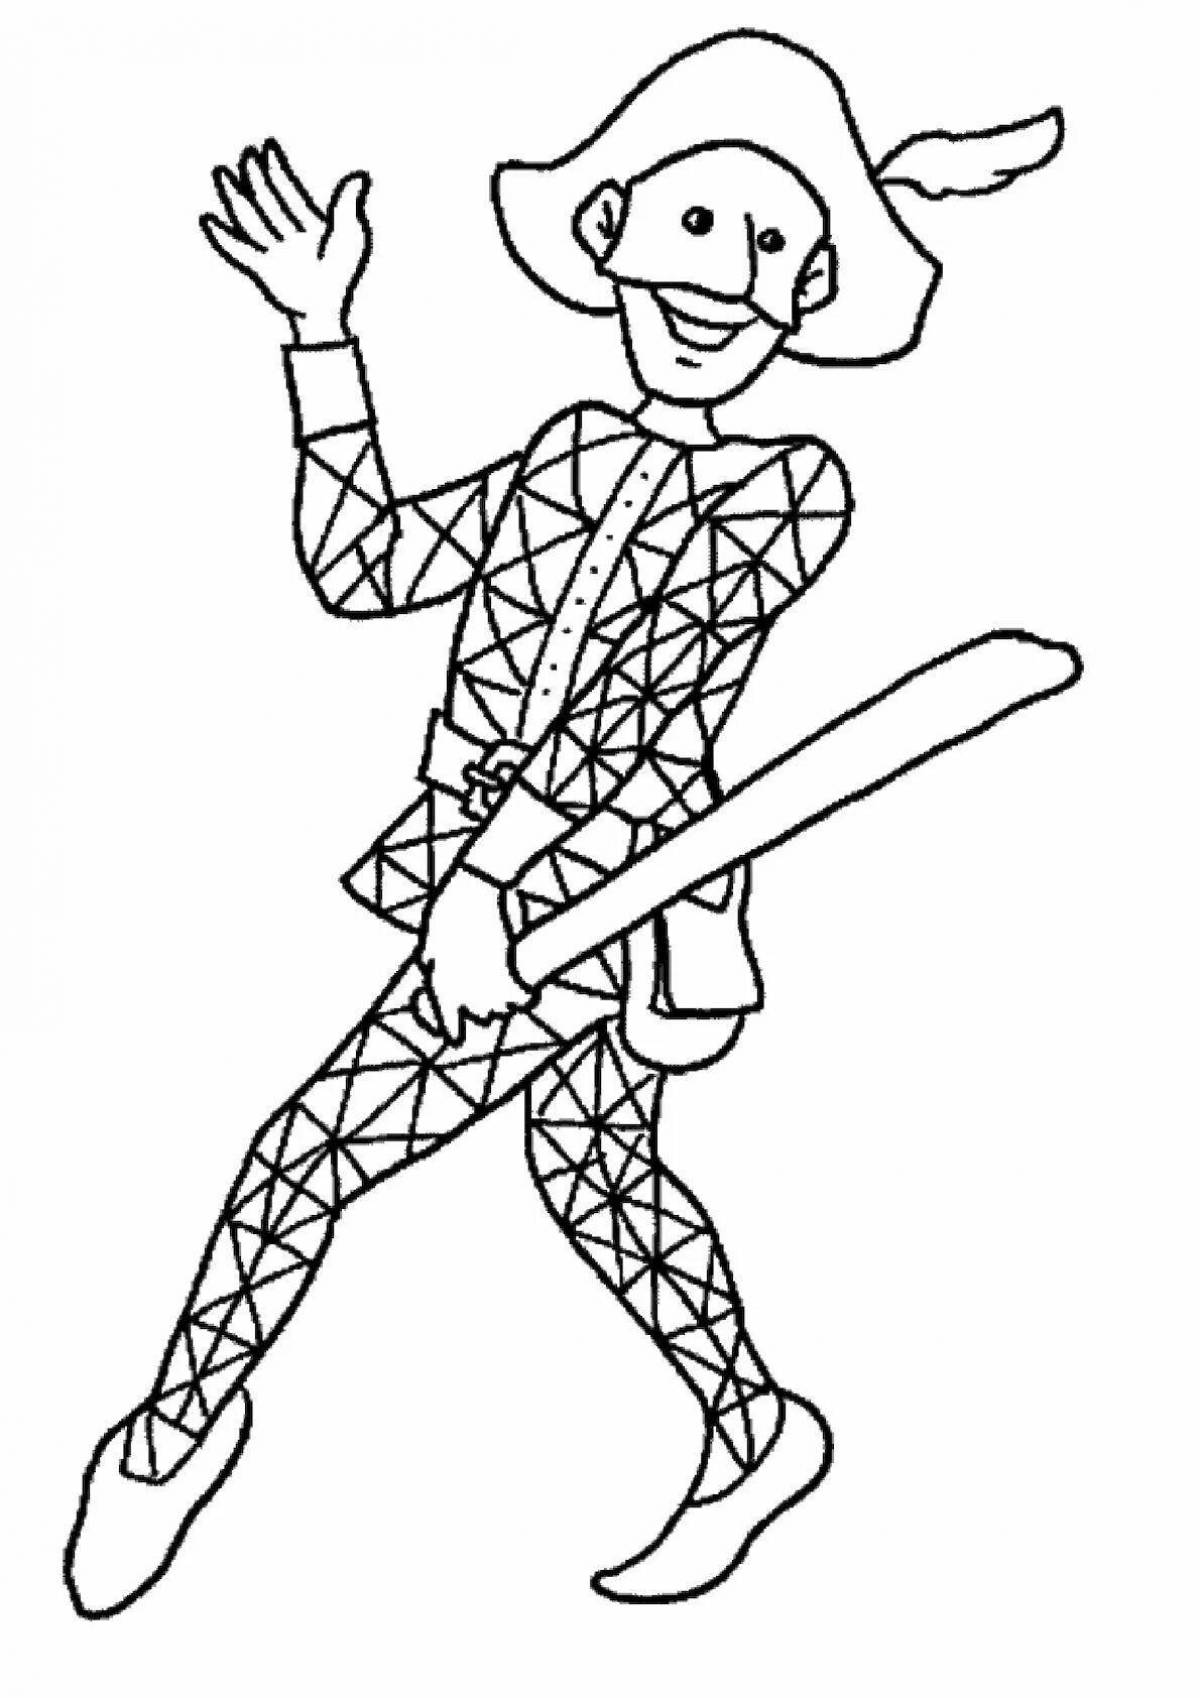 Coloring page graceful harlequin